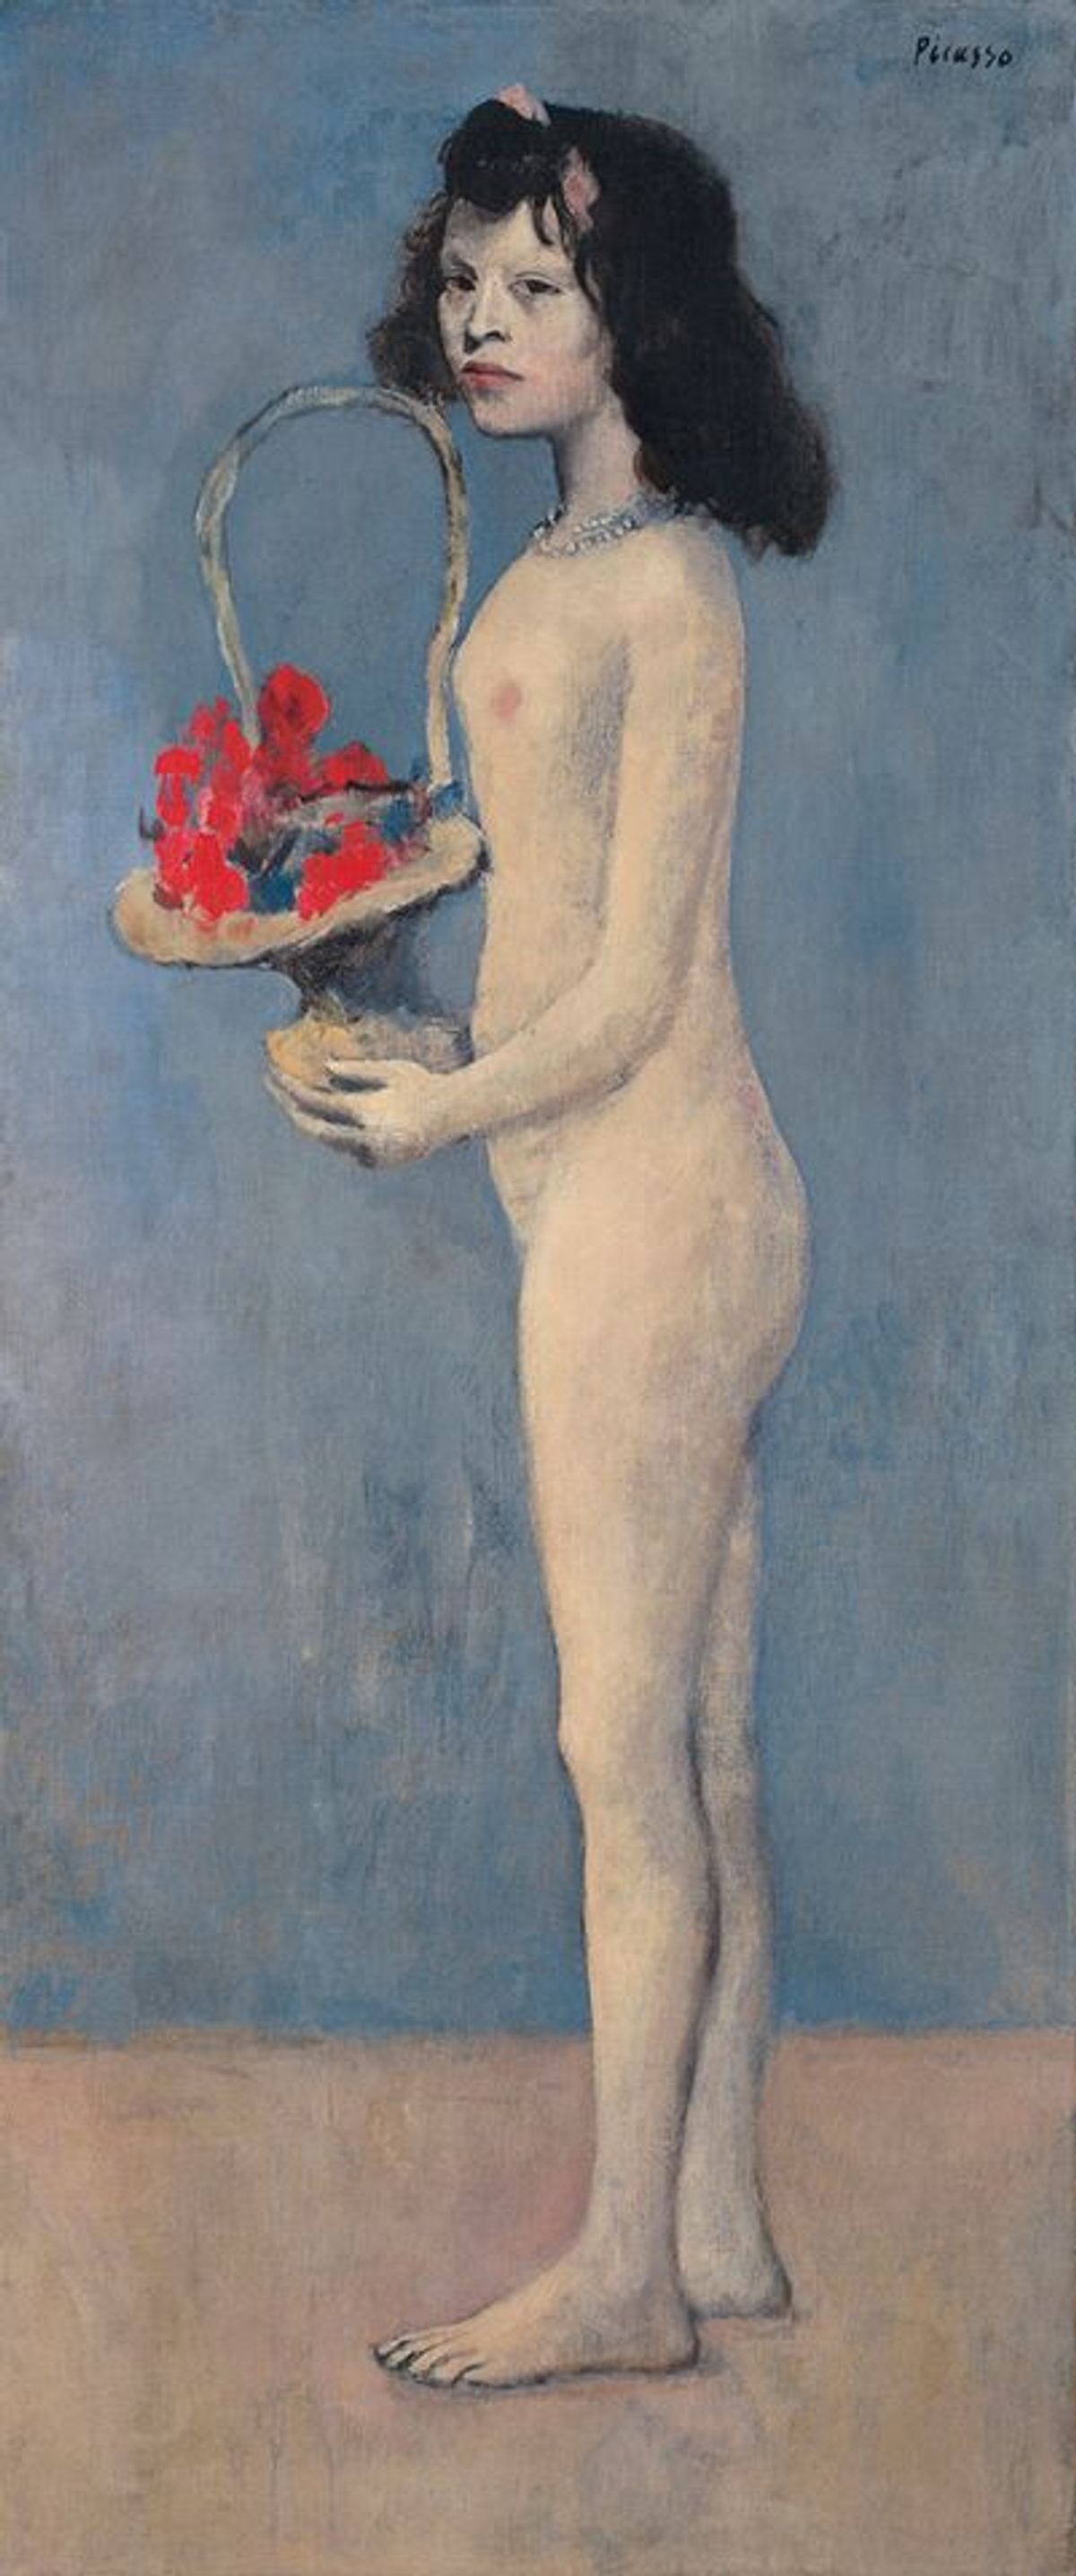 Picasso’s Fillette à la corbeille fleurie (Young Girl with a Flower Basket, 1905) sold for $115m at Christie's last week Christie's Images